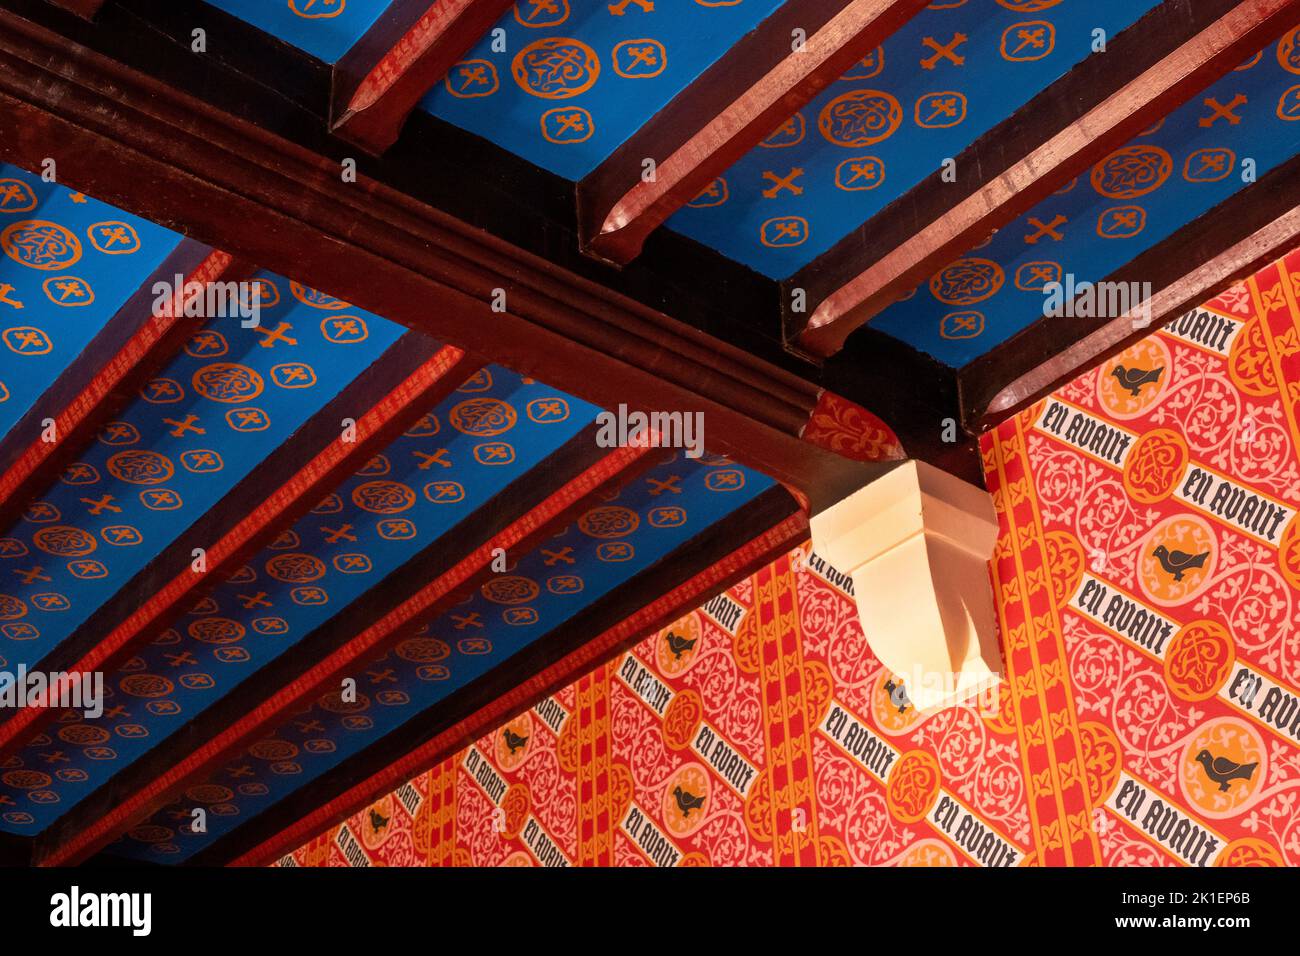 Ceiling and wall designs in the dining room at the Grange , Augustus Pugin's Gothic Revival family home in Ramsgate Kent. Stock Photo